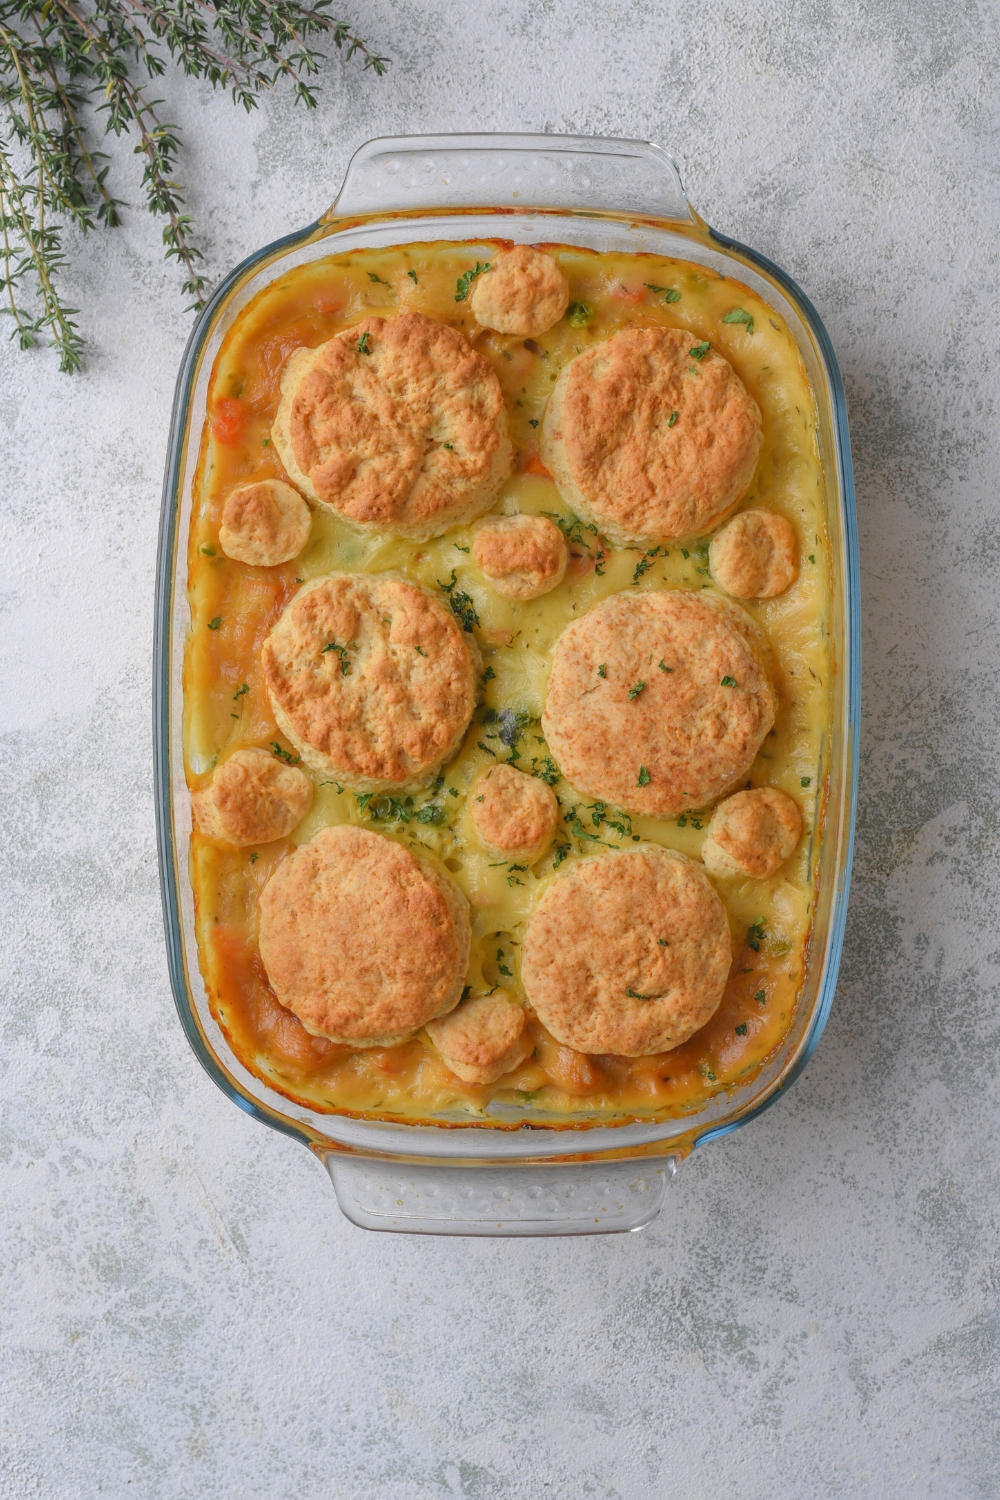 Golden brown biscuits on top of a turkey pot pie in a glass rectangular casserole dish on a grey counter.